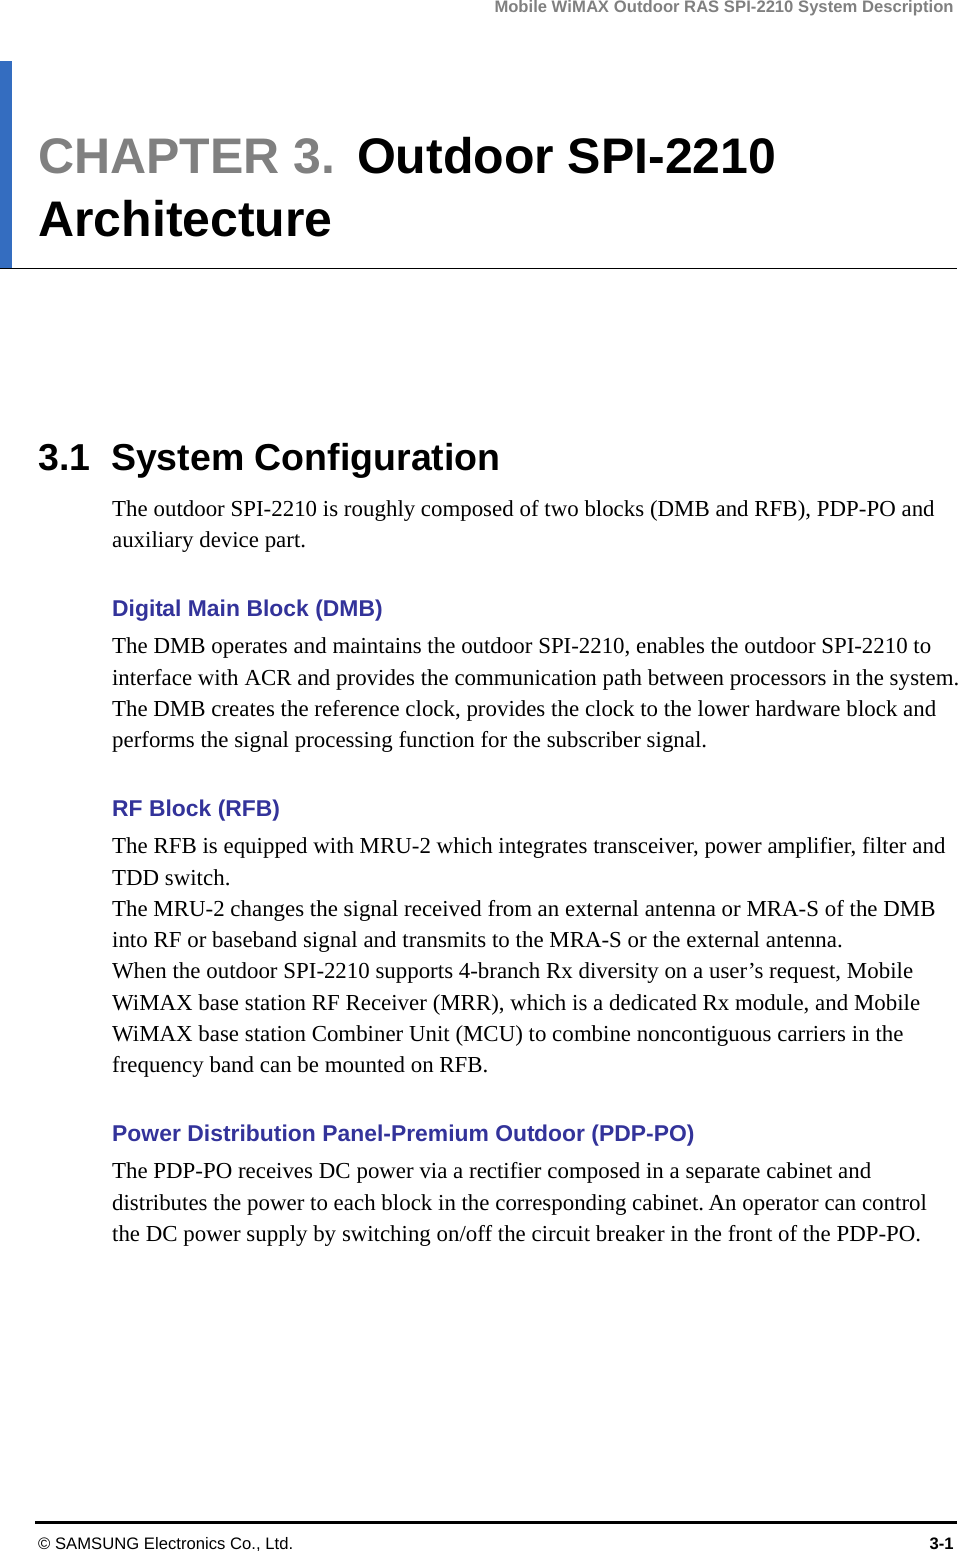 Mobile WiMAX Outdoor RAS SPI-2210 System Description © SAMSUNG Electronics Co., Ltd.  3-1 CHAPTER 3.  Outdoor SPI-2210 Architecture      3.1 System Configuration The outdoor SPI-2210 is roughly composed of two blocks (DMB and RFB), PDP-PO and auxiliary device part.    Digital Main Block (DMB) The DMB operates and maintains the outdoor SPI-2210, enables the outdoor SPI-2210 to interface with ACR and provides the communication path between processors in the system. The DMB creates the reference clock, provides the clock to the lower hardware block and performs the signal processing function for the subscriber signal.    RF Block (RFB) The RFB is equipped with MRU-2 which integrates transceiver, power amplifier, filter and TDD switch.   The MRU-2 changes the signal received from an external antenna or MRA-S of the DMB into RF or baseband signal and transmits to the MRA-S or the external antenna.   When the outdoor SPI-2210 supports 4-branch Rx diversity on a user’s request, Mobile WiMAX base station RF Receiver (MRR), which is a dedicated Rx module, and Mobile WiMAX base station Combiner Unit (MCU) to combine noncontiguous carriers in the frequency band can be mounted on RFB.  Power Distribution Panel-Premium Outdoor (PDP-PO) The PDP-PO receives DC power via a rectifier composed in a separate cabinet and distributes the power to each block in the corresponding cabinet. An operator can control the DC power supply by switching on/off the circuit breaker in the front of the PDP-PO.    